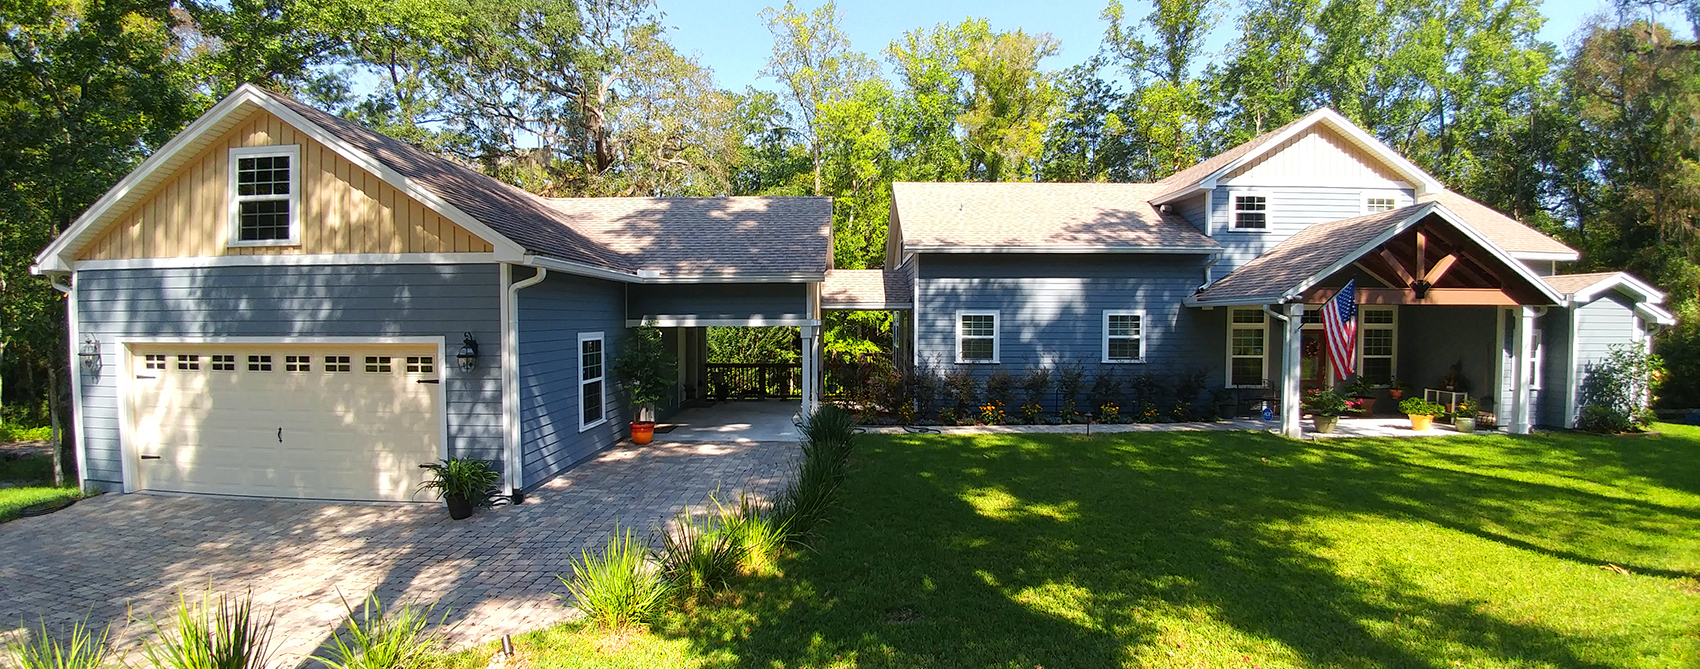 New, residential home in a rural area of Florida typically inspected by Southern Home Inspection Services